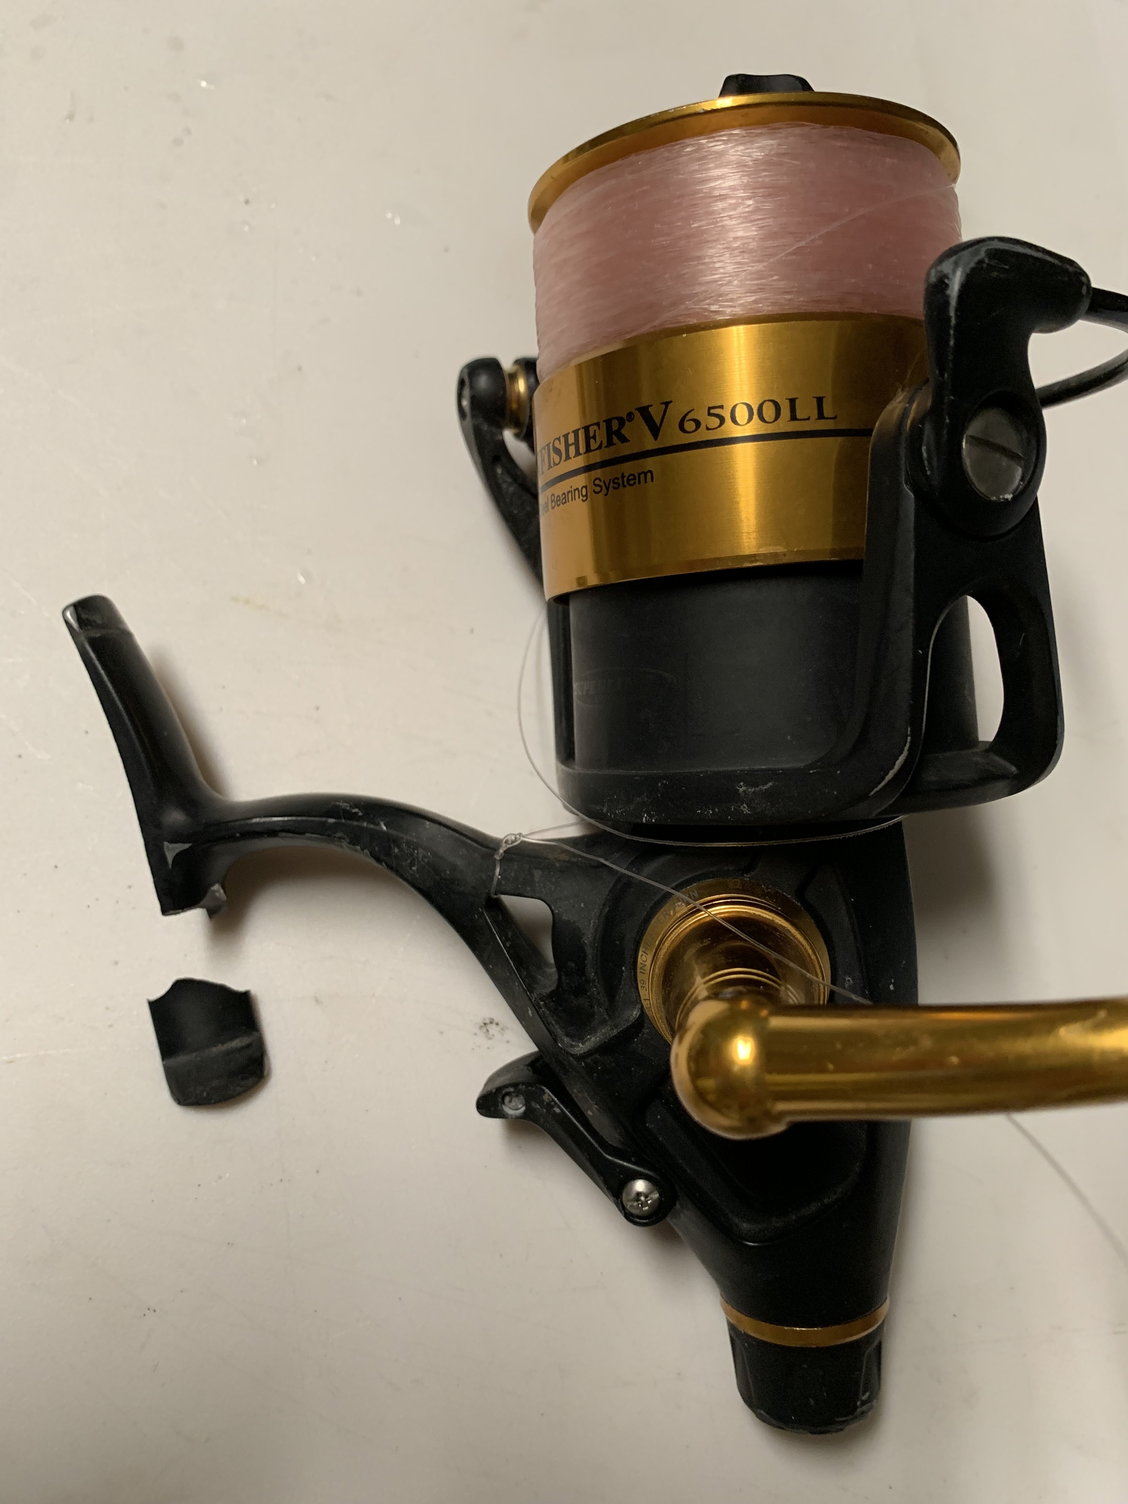 Penn Reels SpinFisher 650 SS how to take apart and service this